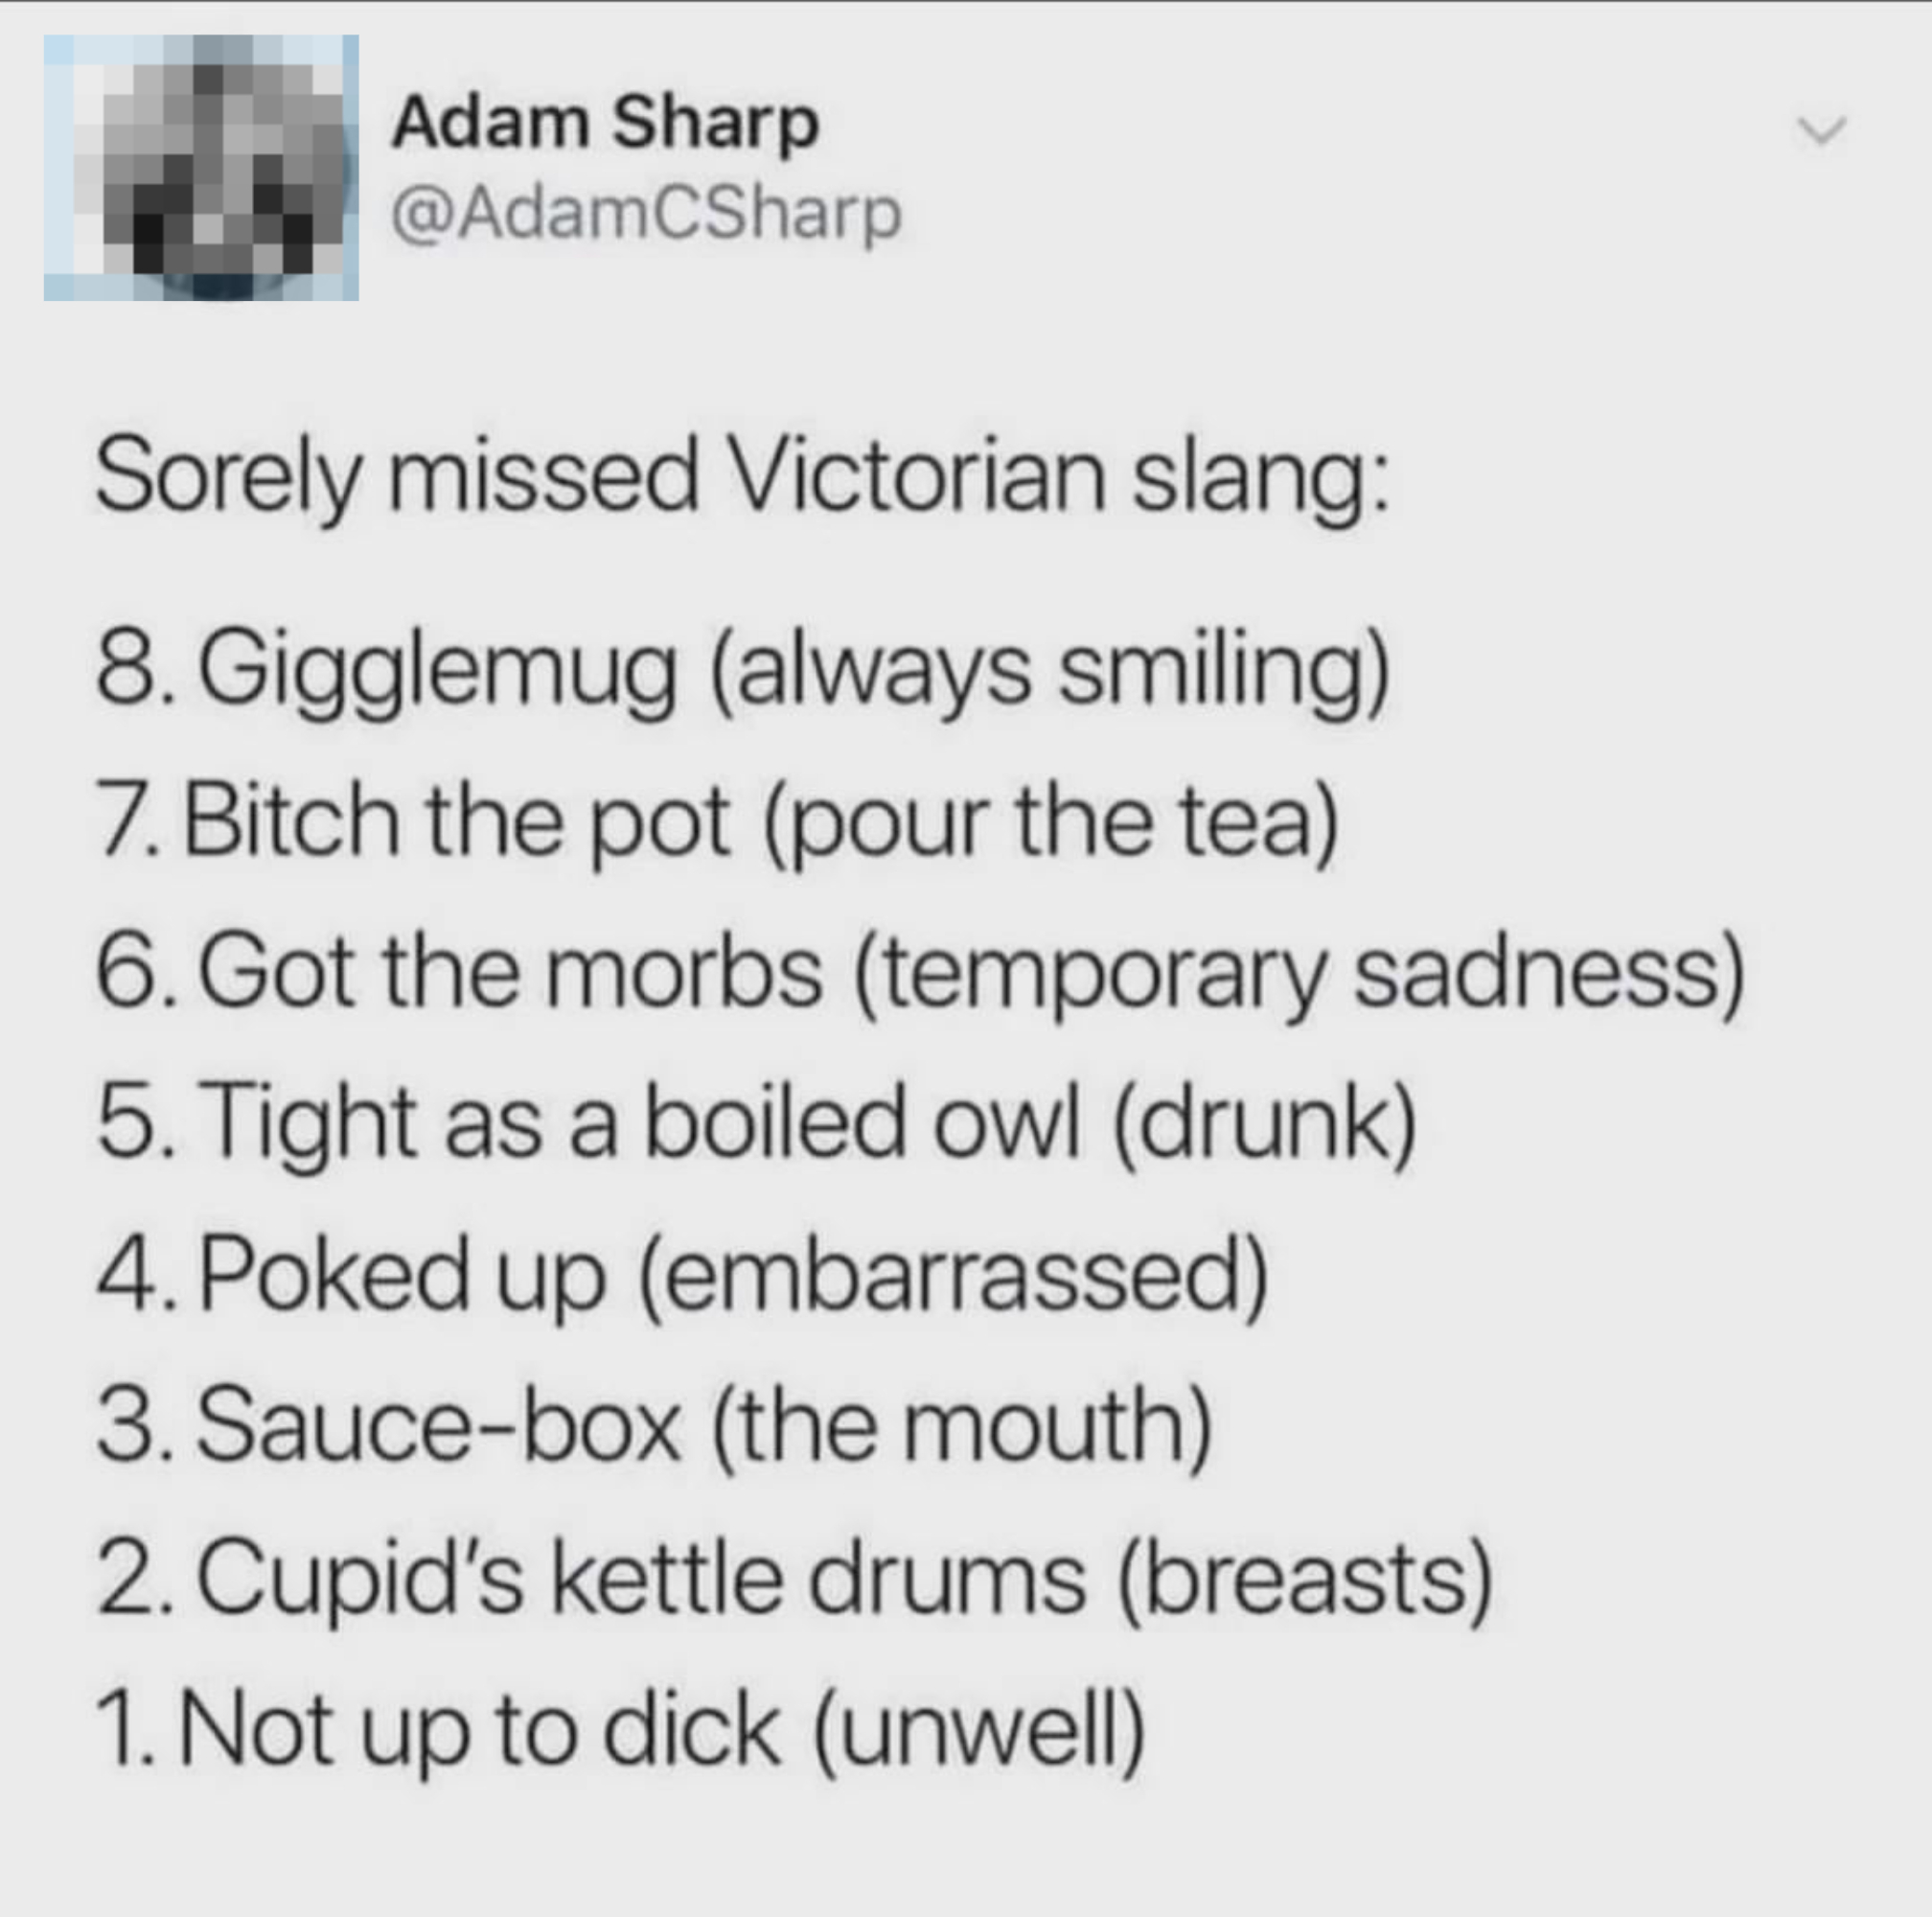 A list of &quot;Sorely missed Victorian slang&quot; phrases on a social media post by Adam Sharp, including &quot;Not up to dick&quot; (unwell), &quot;Got the morbs&quot; (temporary sadness), &quot;Bitch the pot&quot; (pour the tea), and &quot;Tight as a boiled owl&quot; (drunk)